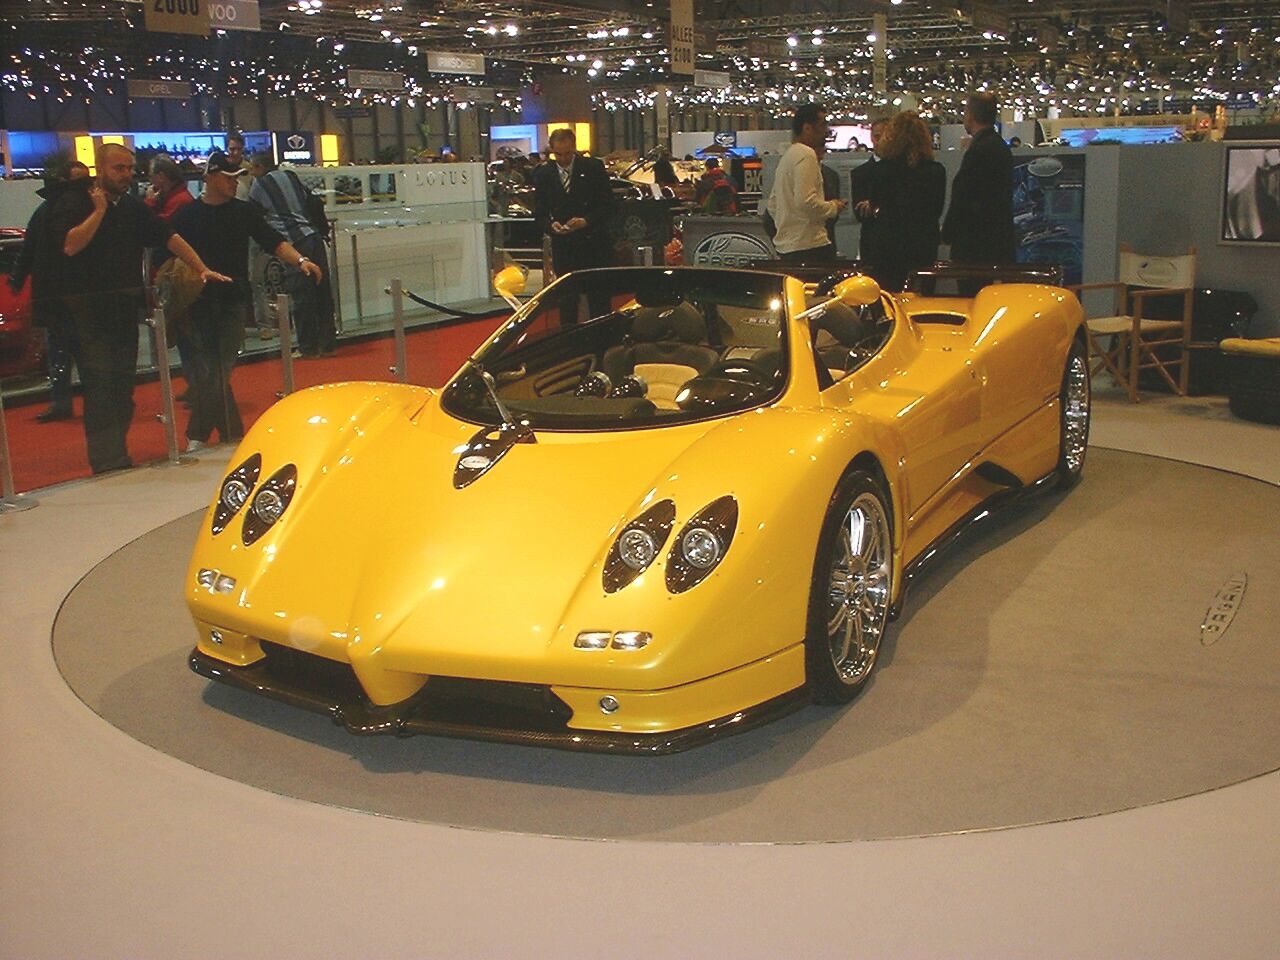 the new Pagani Zonda Roadster received its world premiere at the Geneva Motor Show this week